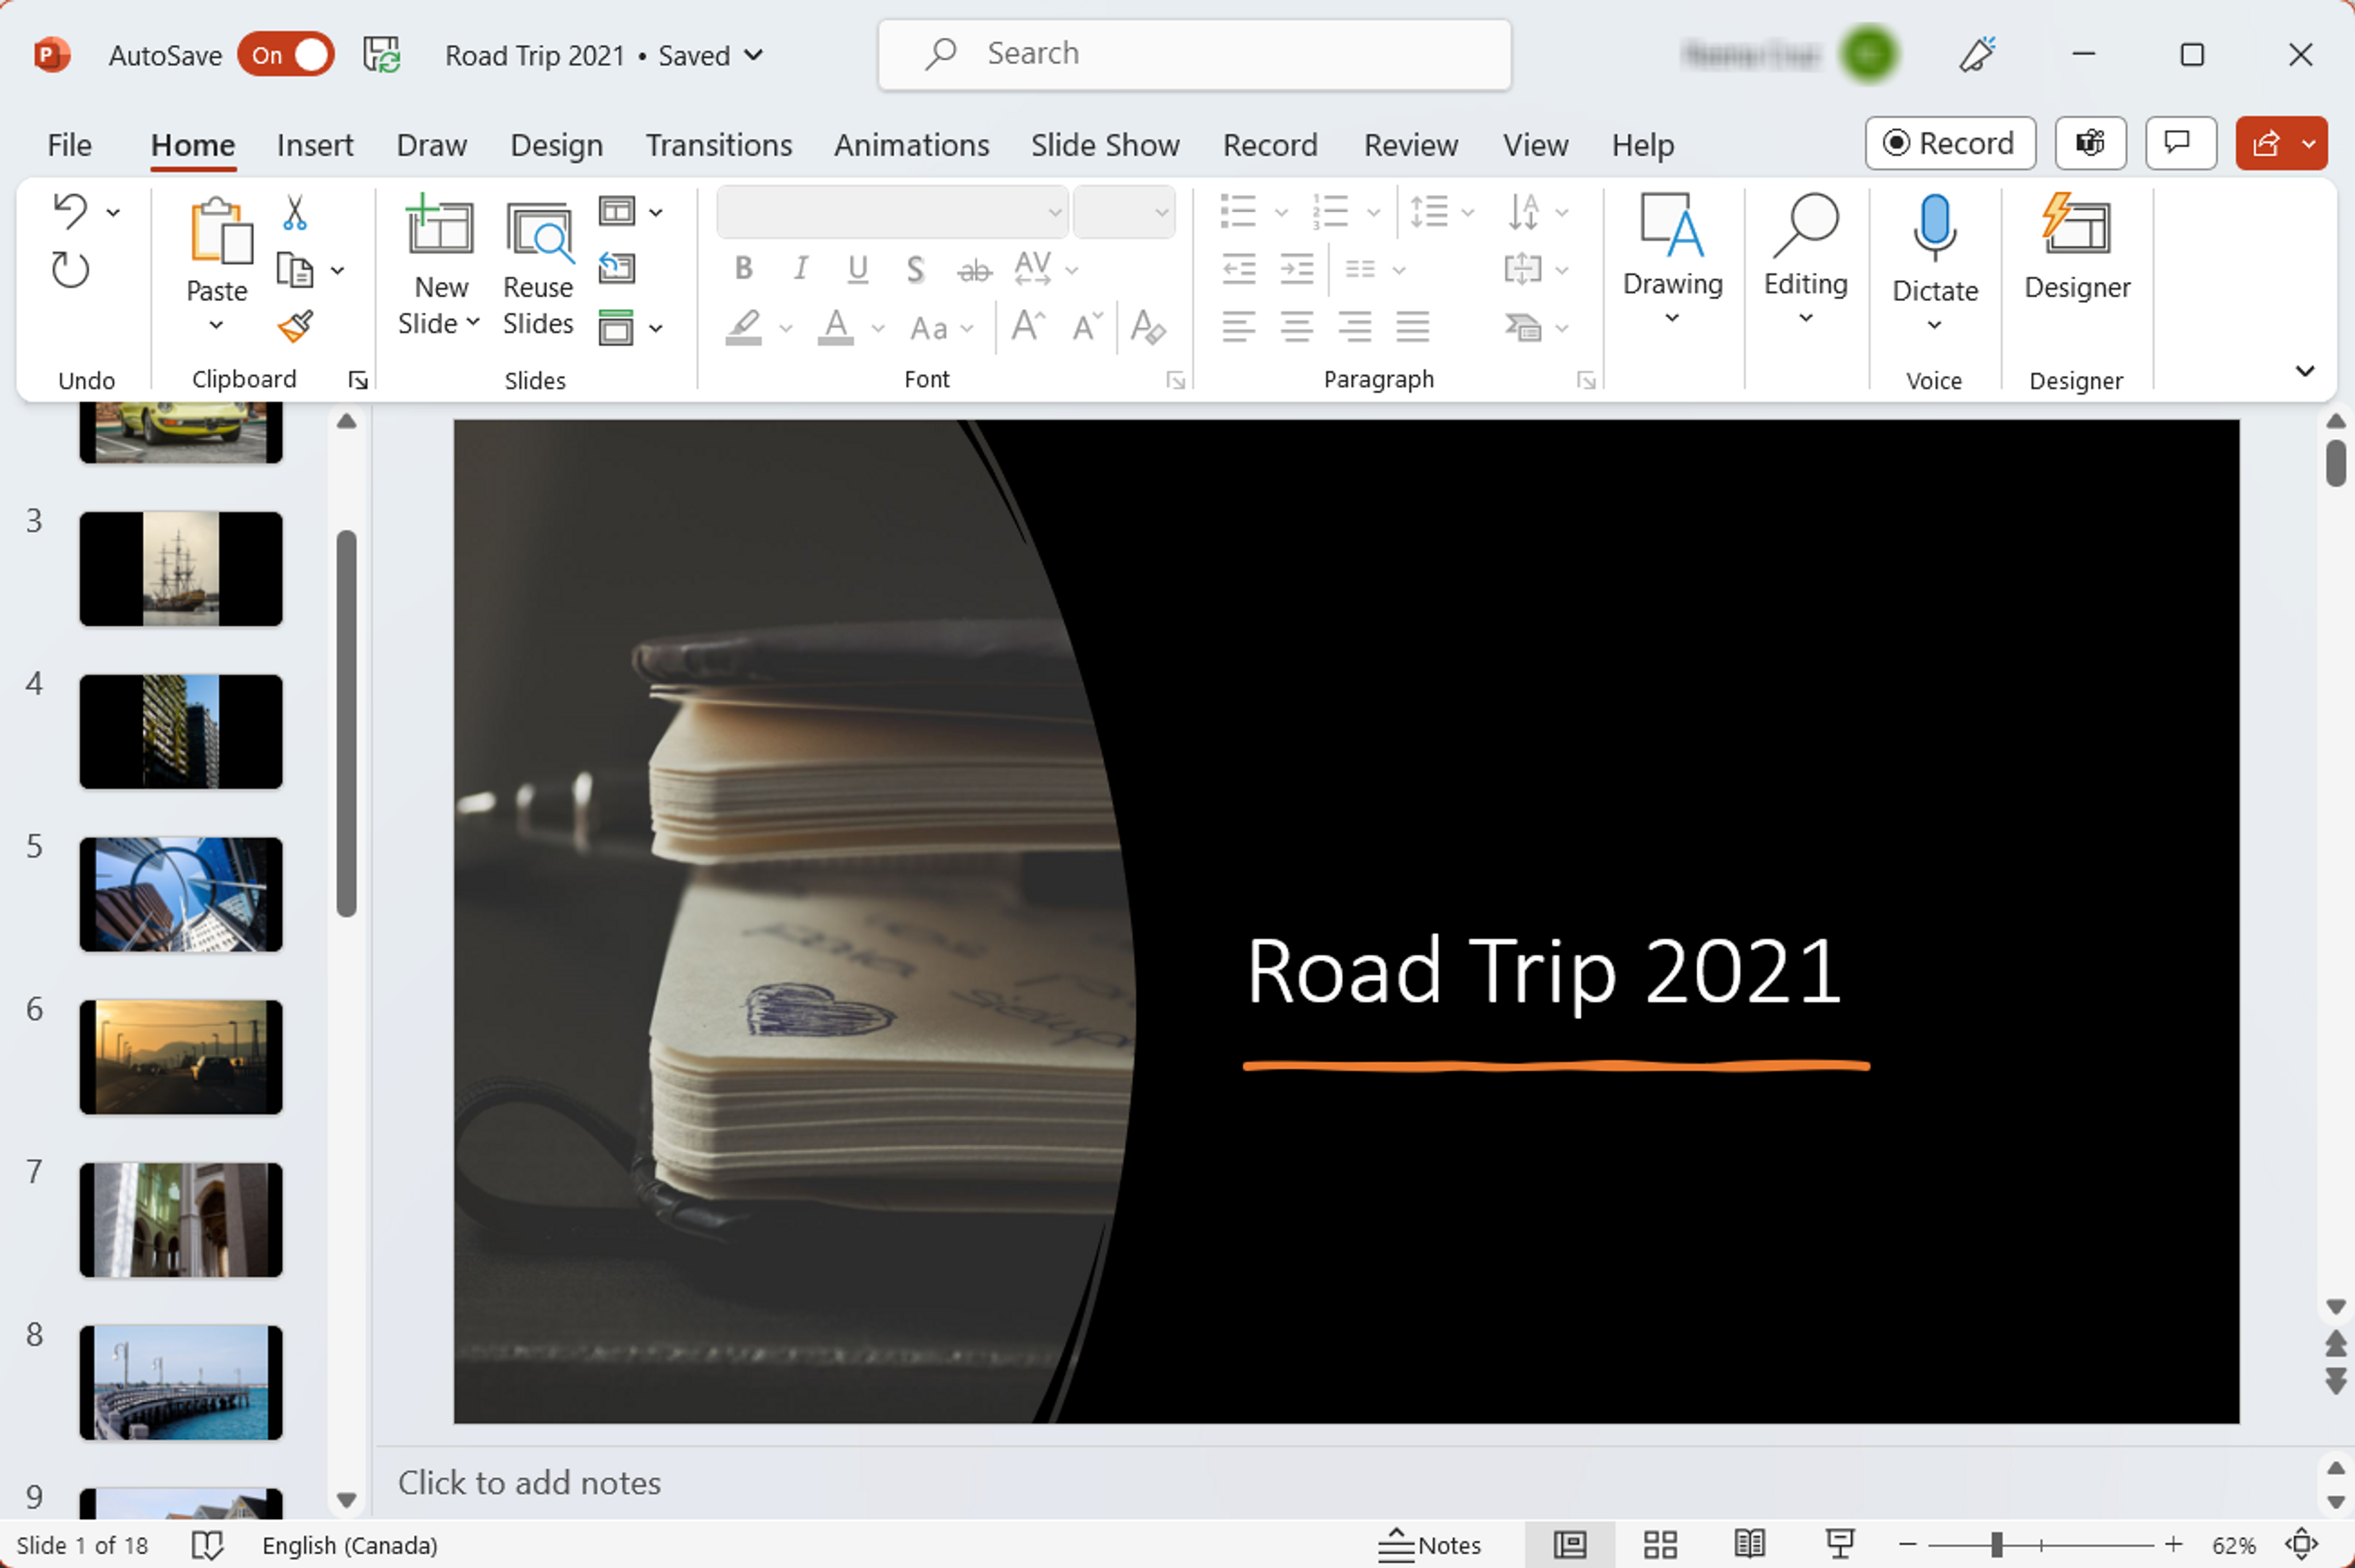 A photo album being created in MS PowerPoint